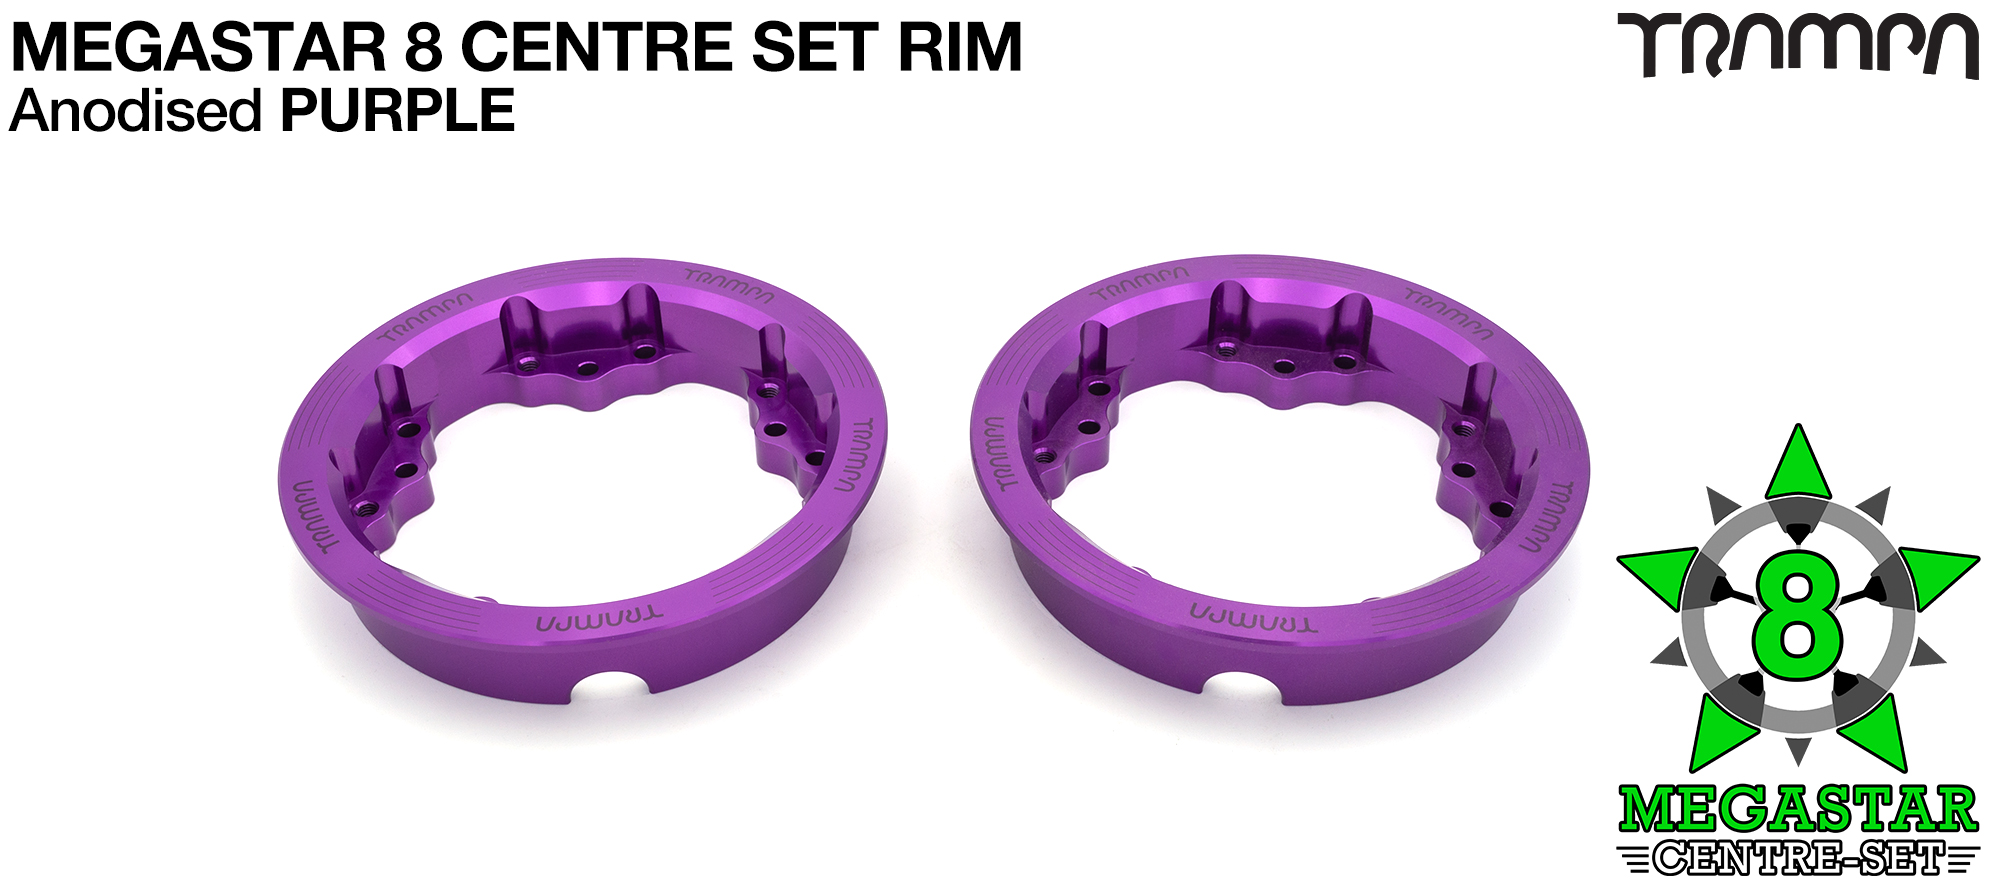 MEGASTAR 8 CS Rims Measure 3.75 x 2 Inch. The bearings are positioned CENTRE-SET & accept all 3.75 Rim Tyres - PURPLE 